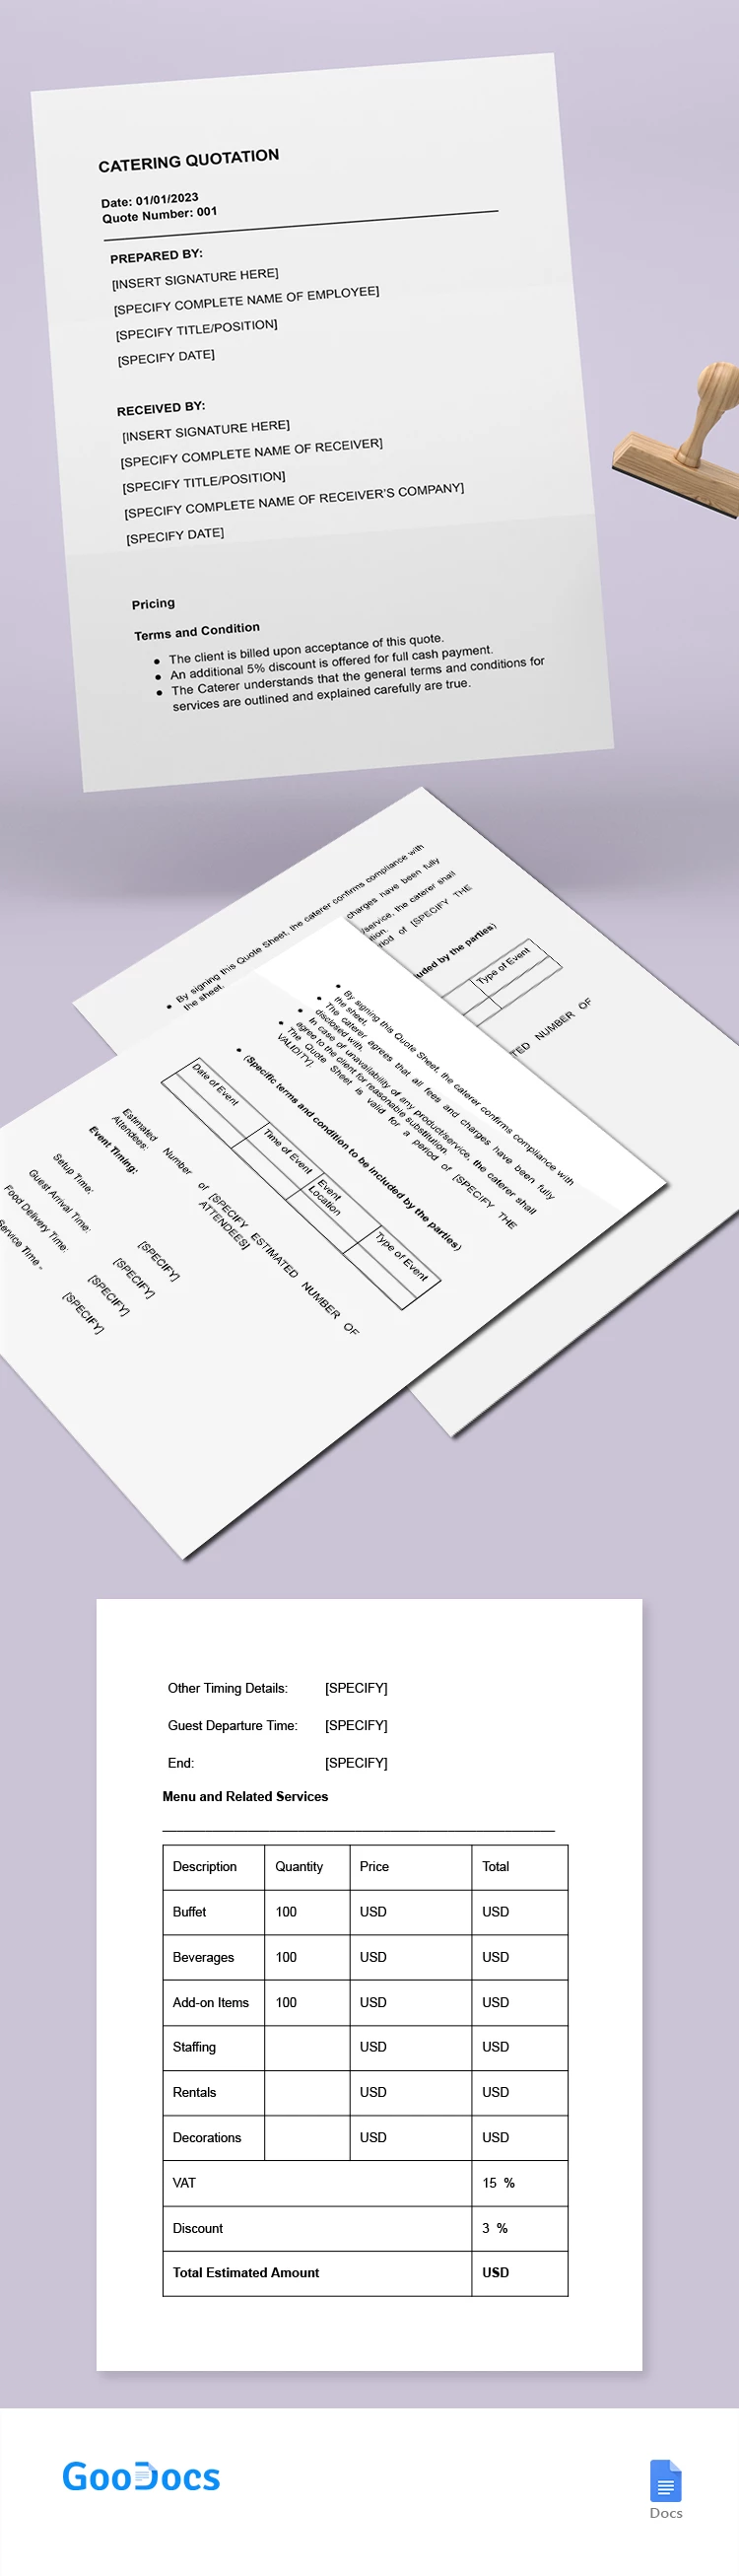 Catering Quote - free Google Docs Template - 10065356